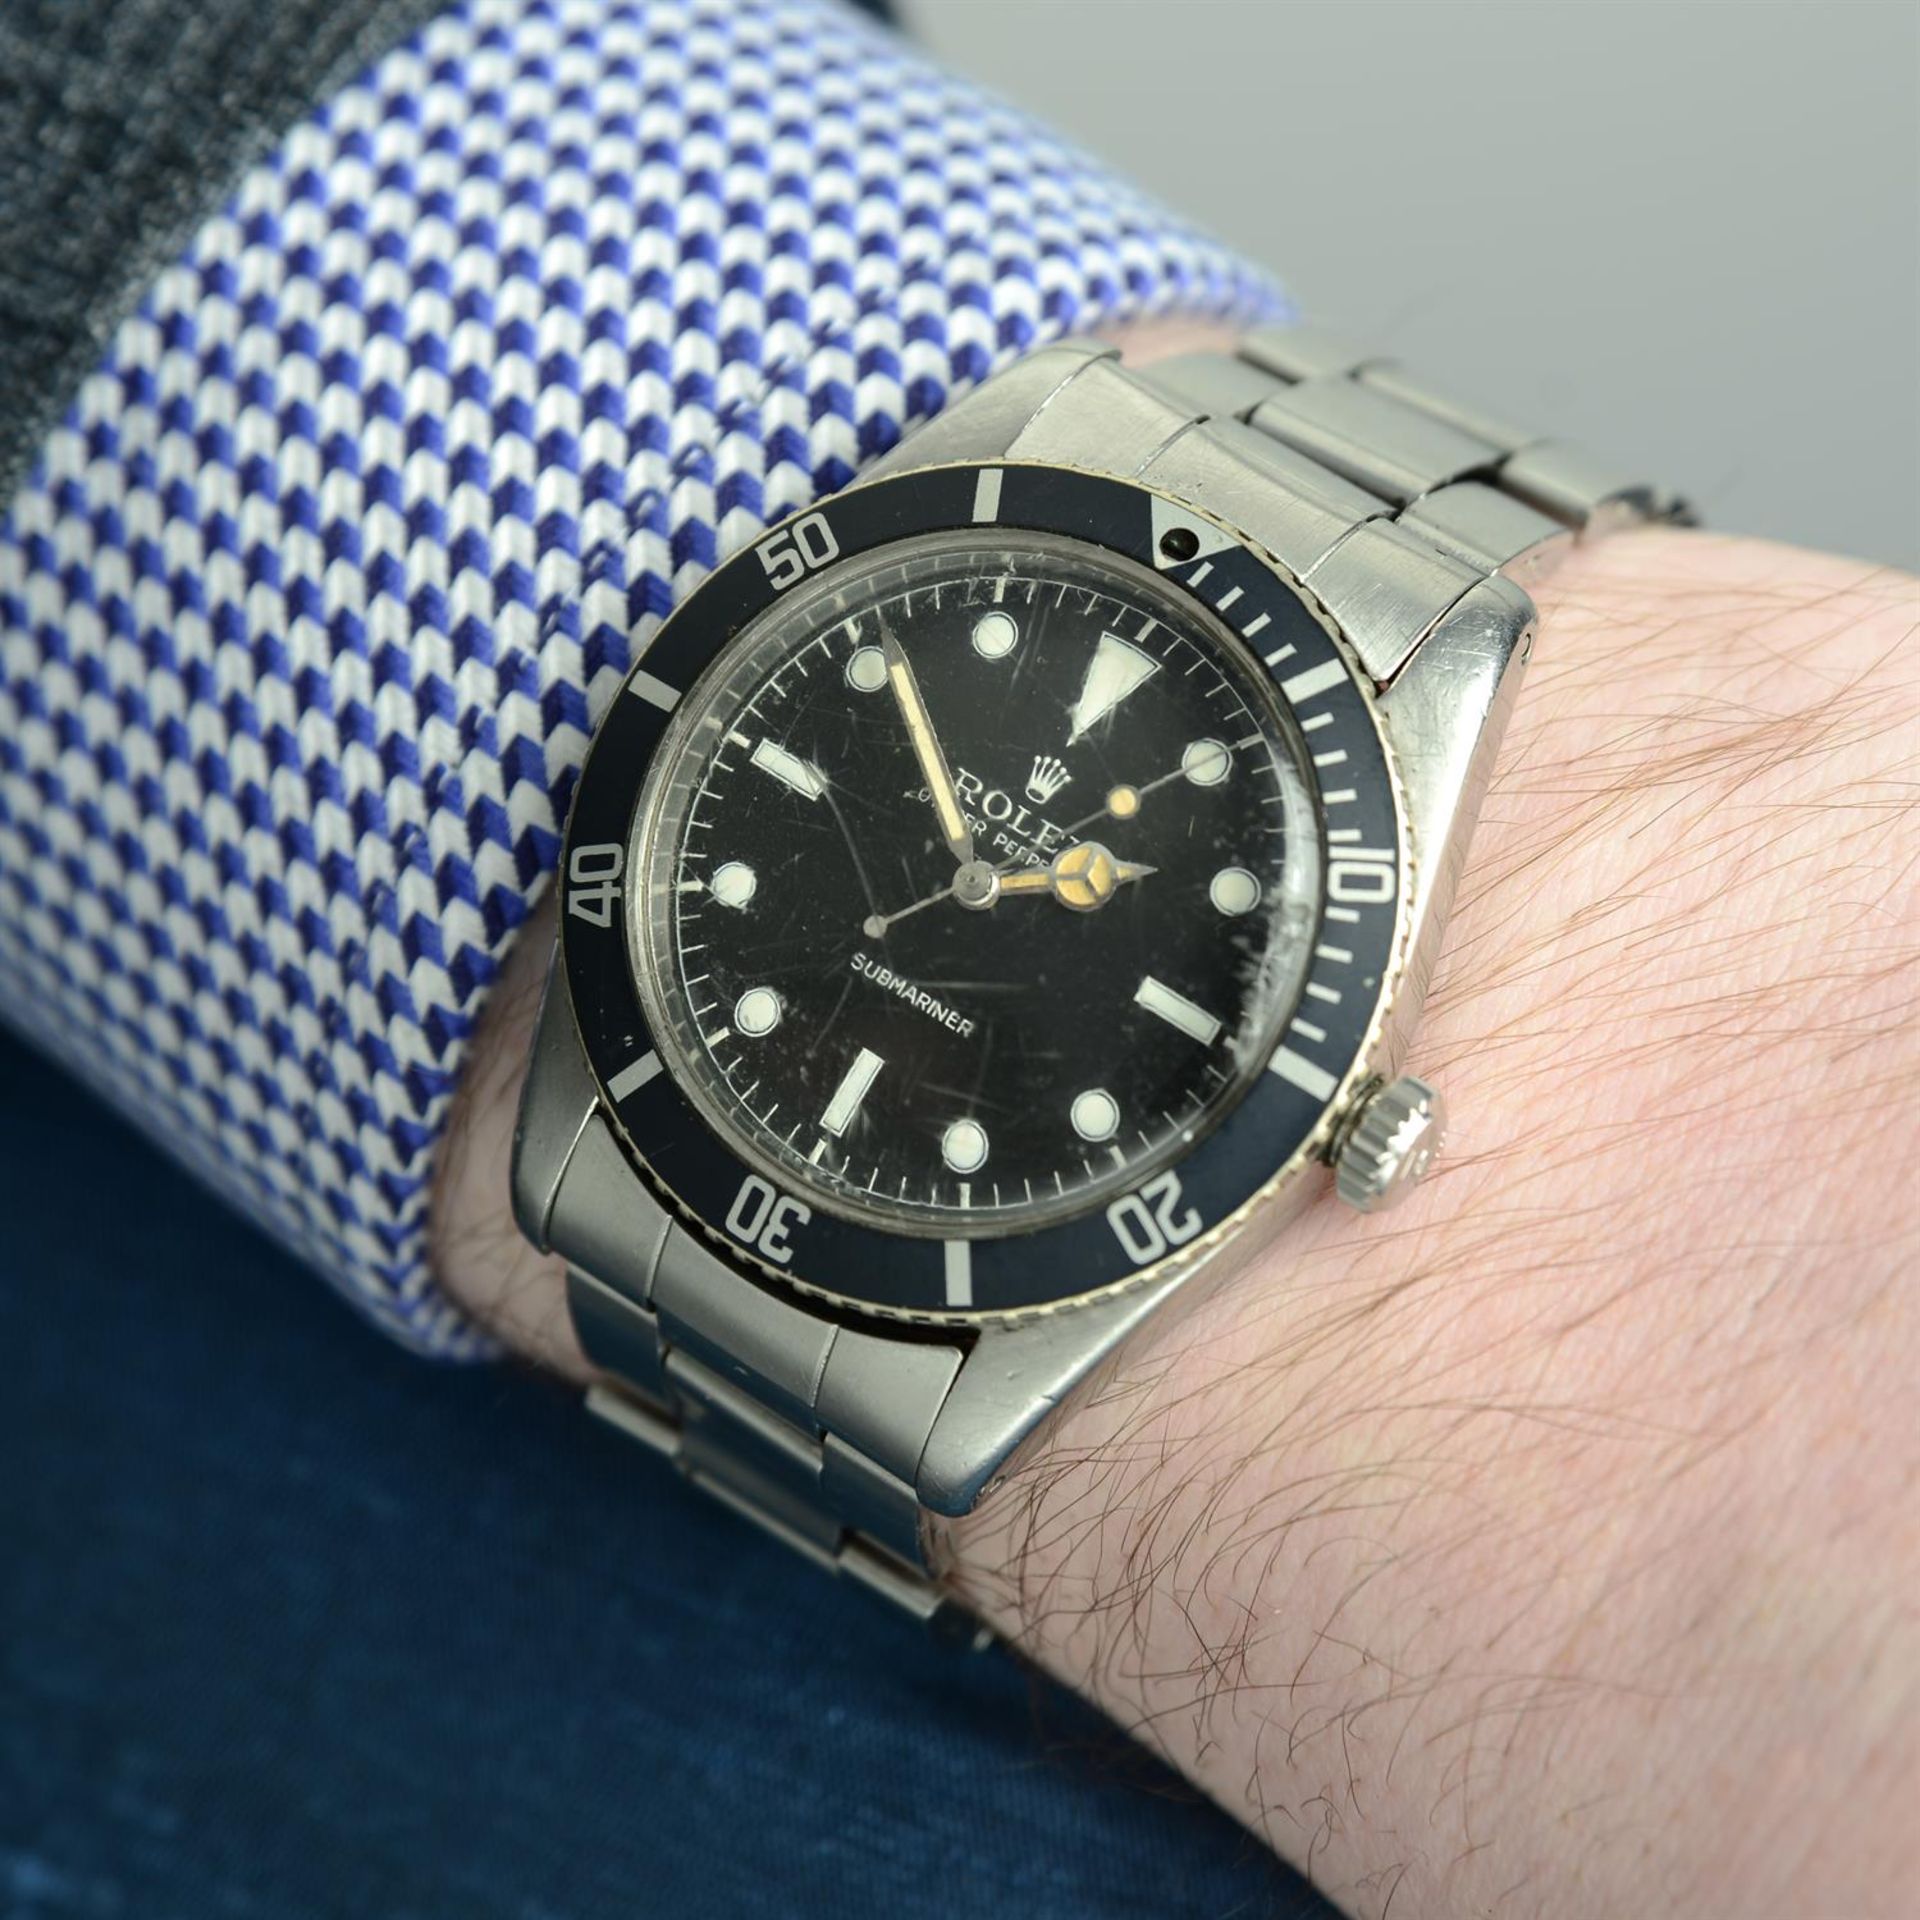 ROLEX - a stainless steel Oyster Perpetual Submariner bracelet watch, 37mm. - Image 6 of 7